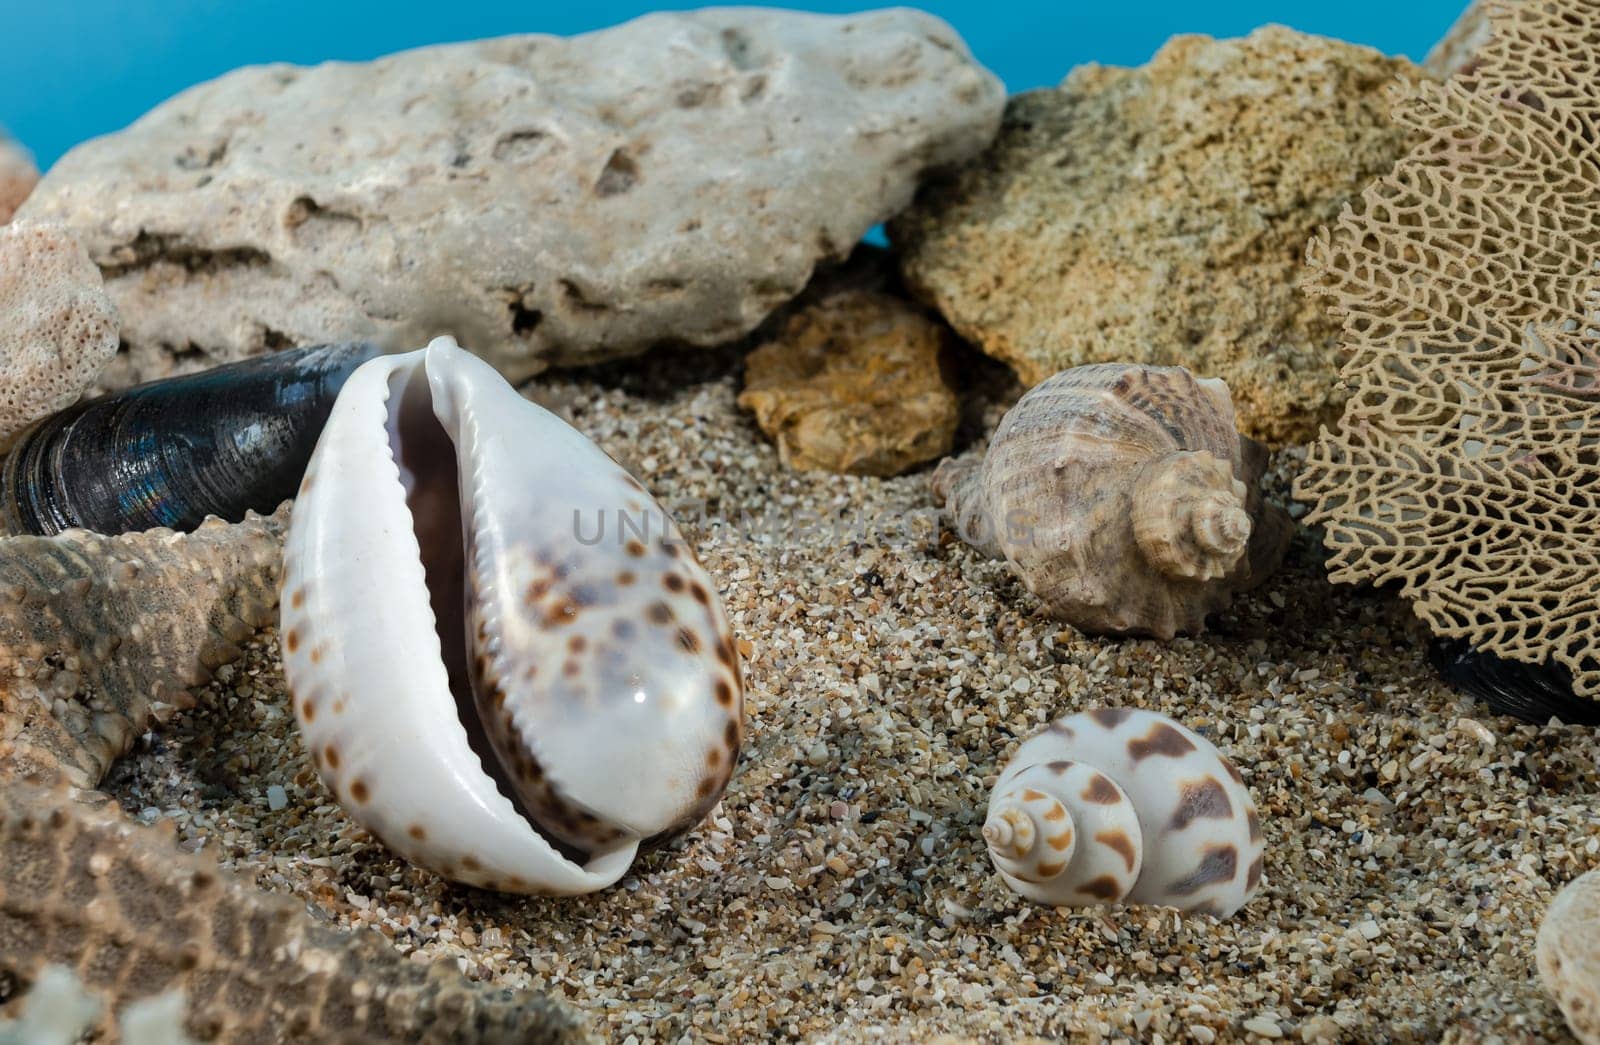 Tiger Cowrie Shell on the sand underwater by Multipedia